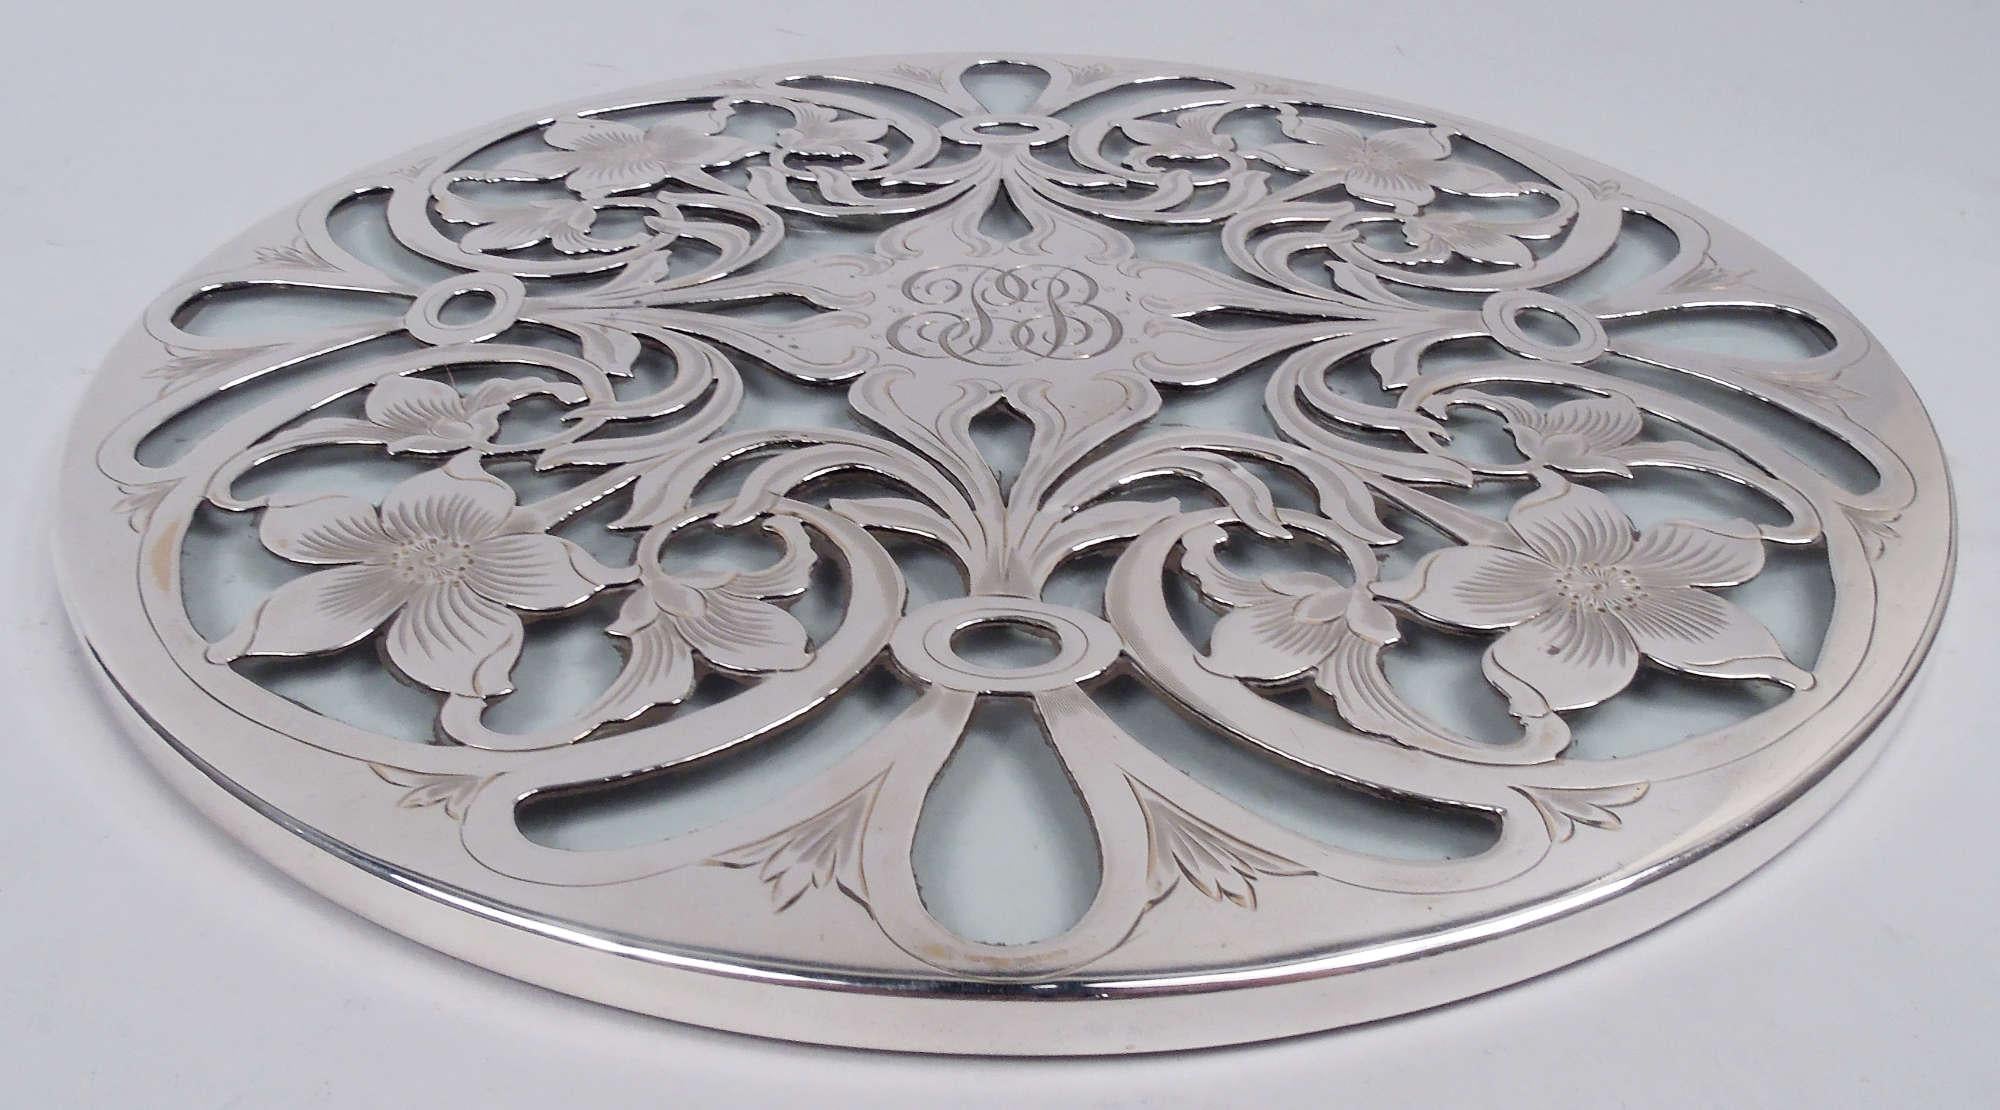 Engraved American Art Nouveau Floral Silver Overlay 10-Inch Round Trivet